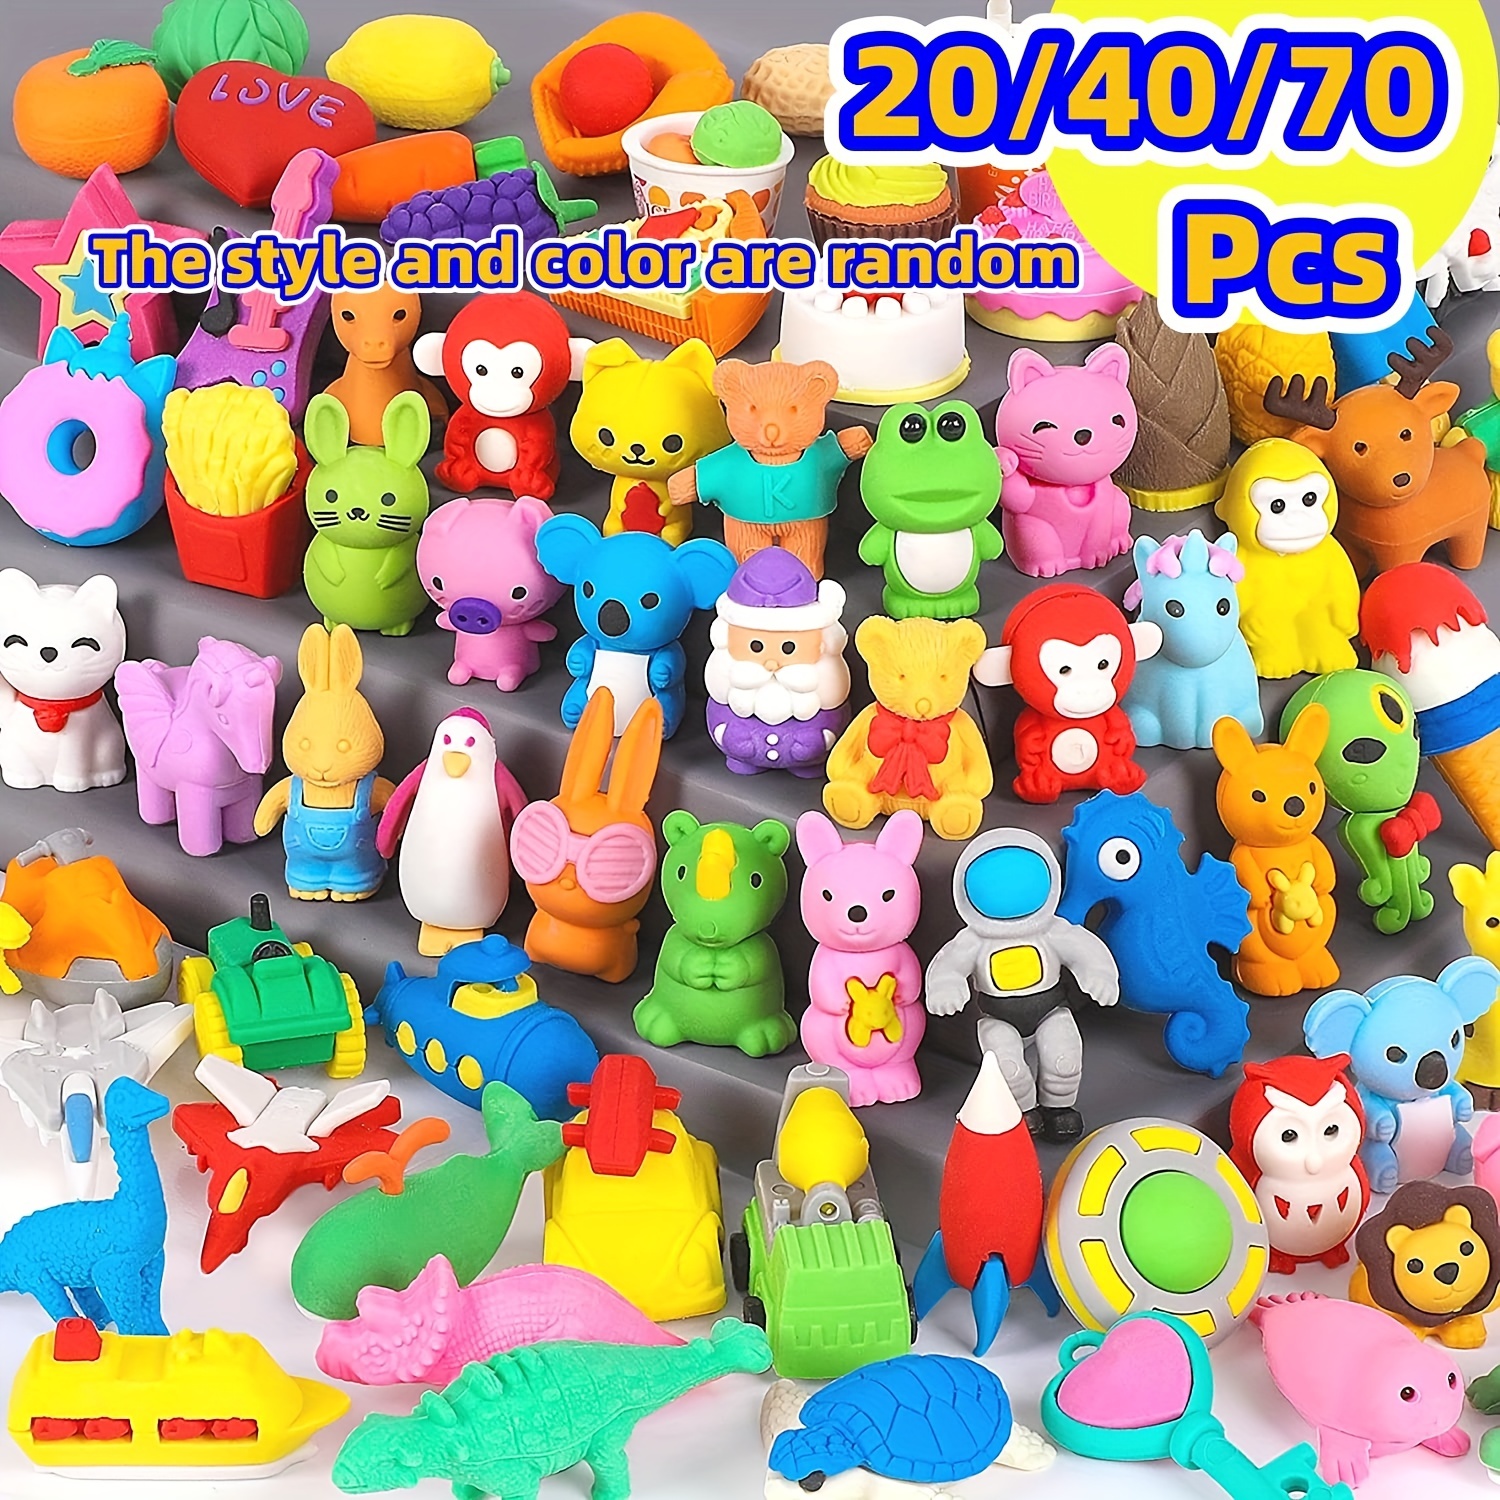 300 Pieces Animal Mini Erasers for Kids, Assortment Novelty Pencil Erasers  Bulk for Students Party Favor Home School Work Classroom Rewards Prizes